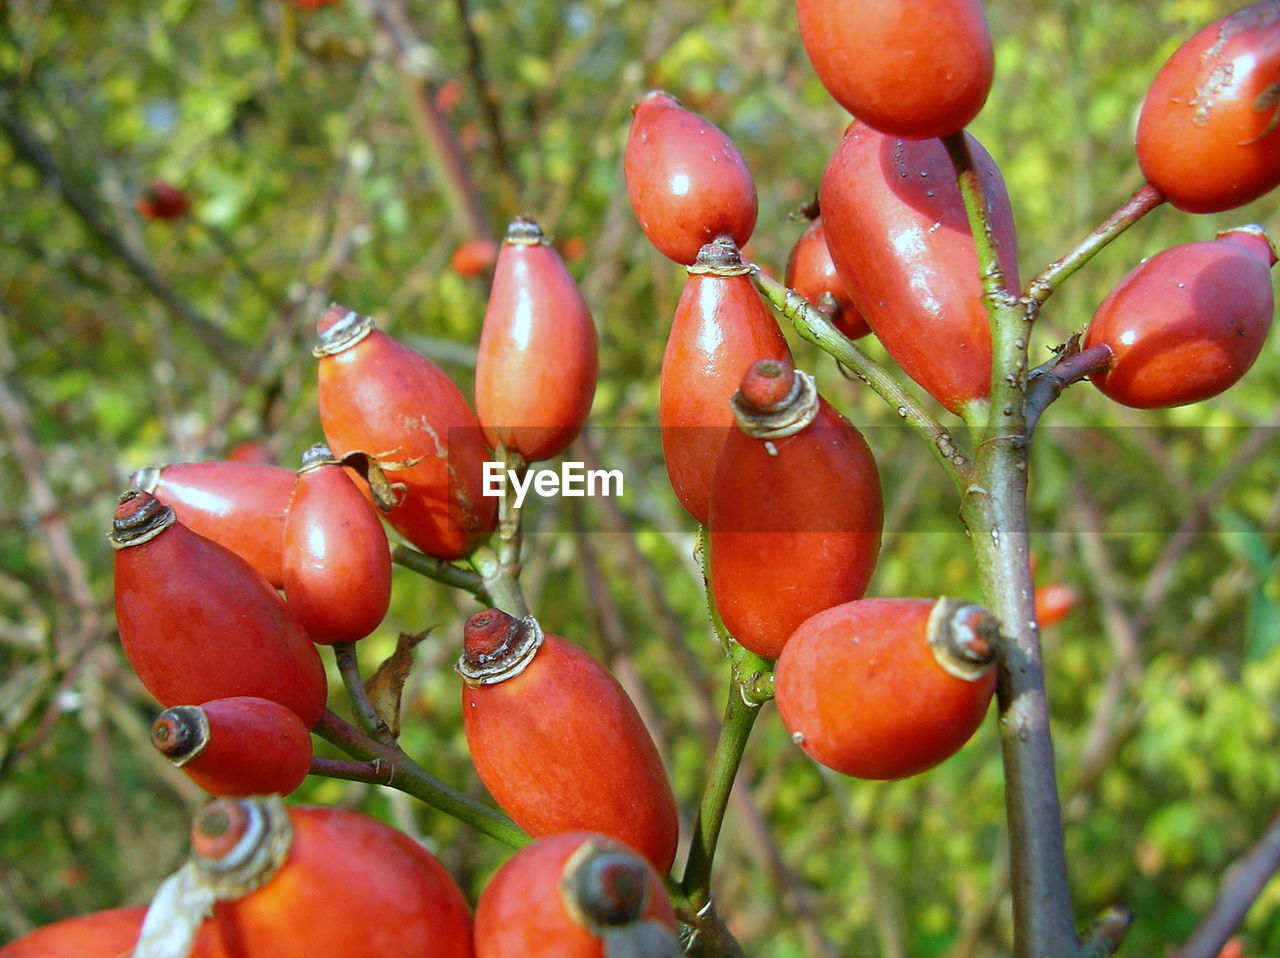 CLOSE-UP OF CHERRIES GROWING ON PLANT